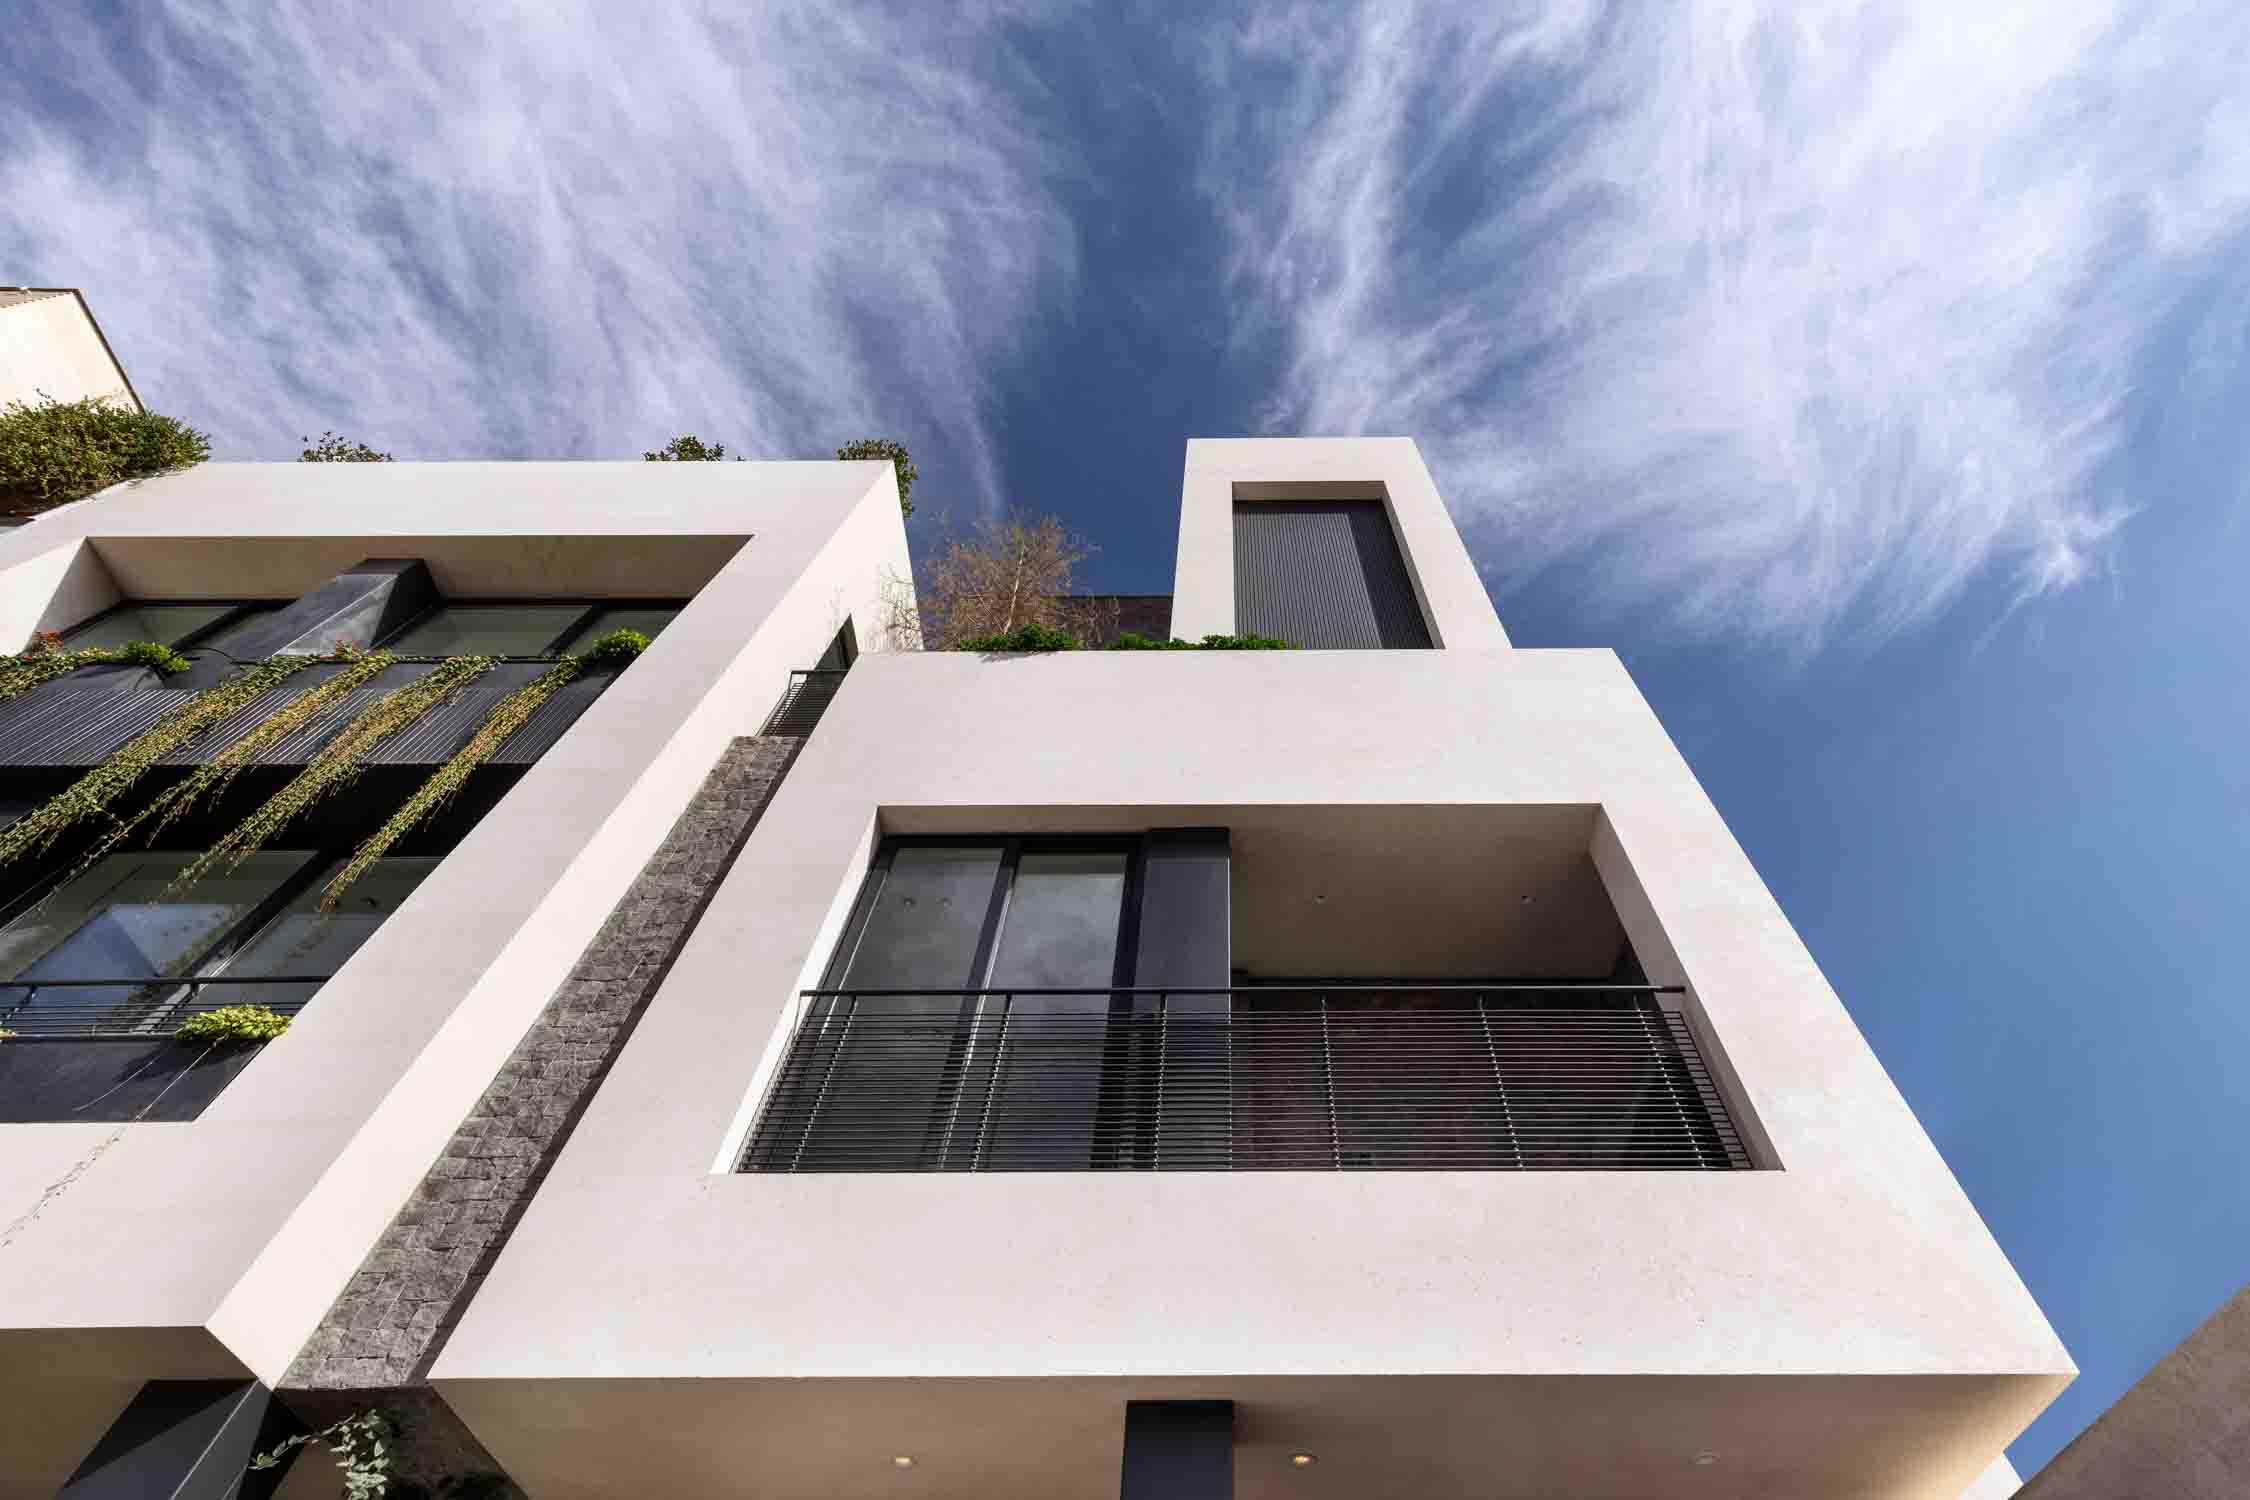 picture no. 4 ofApartment No 07 project, designed by Ahmad Ghodsimanesh & Partners